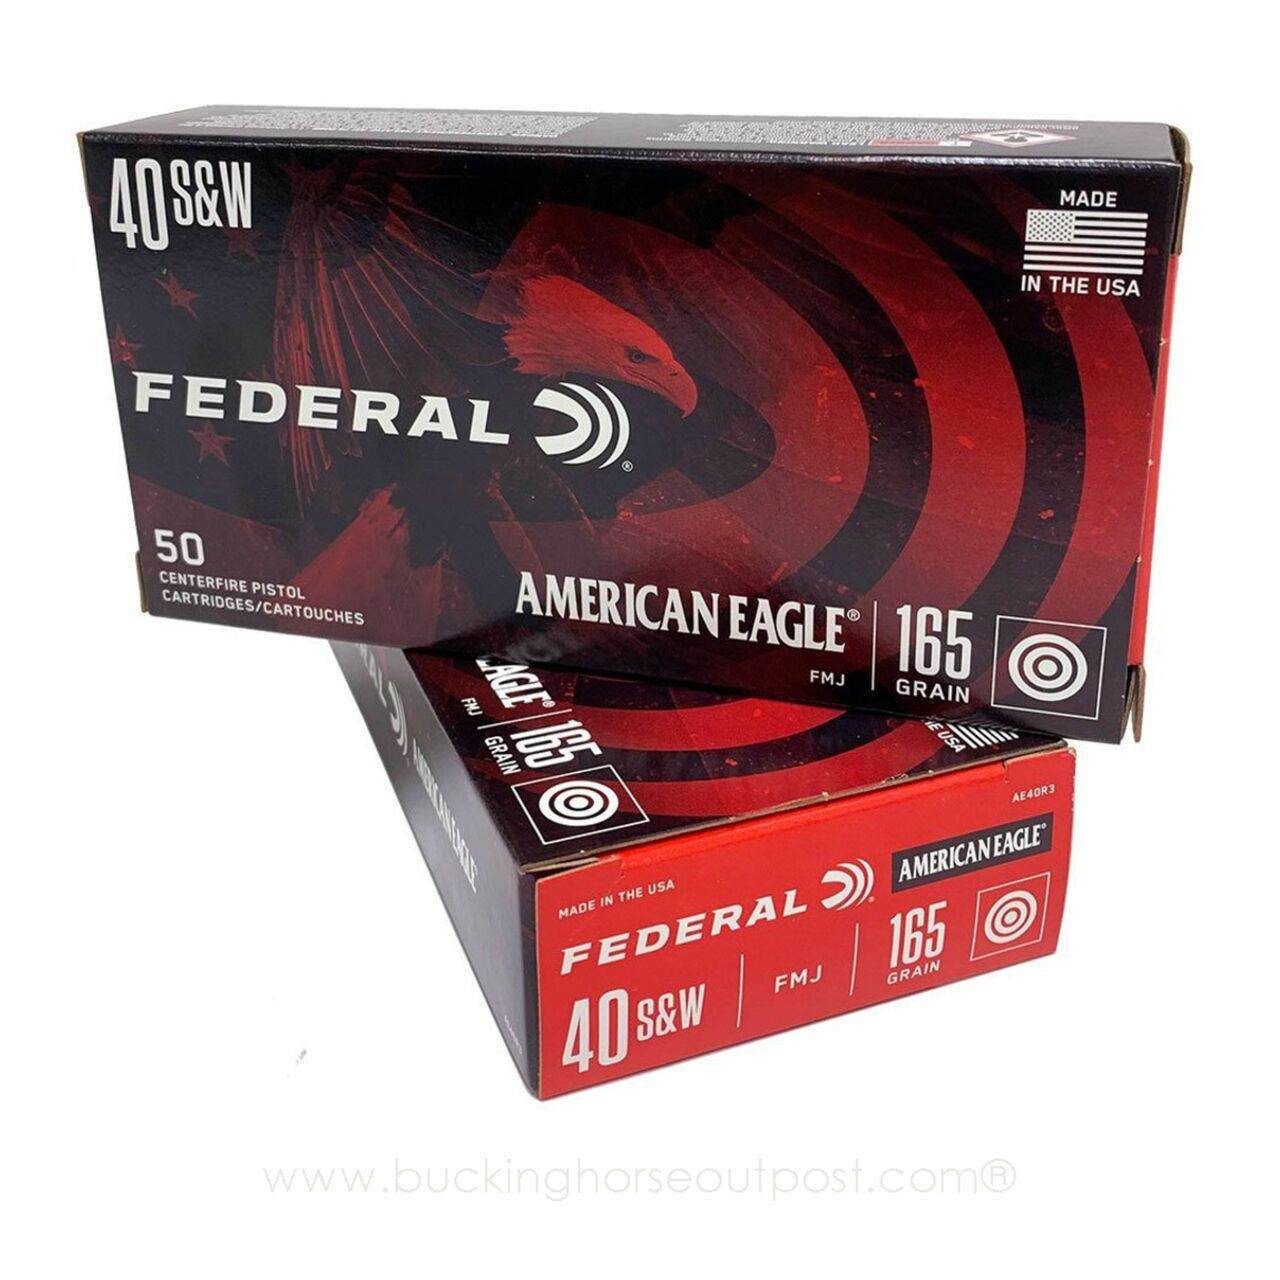 Federal American Eagle .40 S&W 165 Grain Full Metal Jacket 50rds Per Box (AE40R3)- FREE SHIPPING ON ORDERS OVER $175